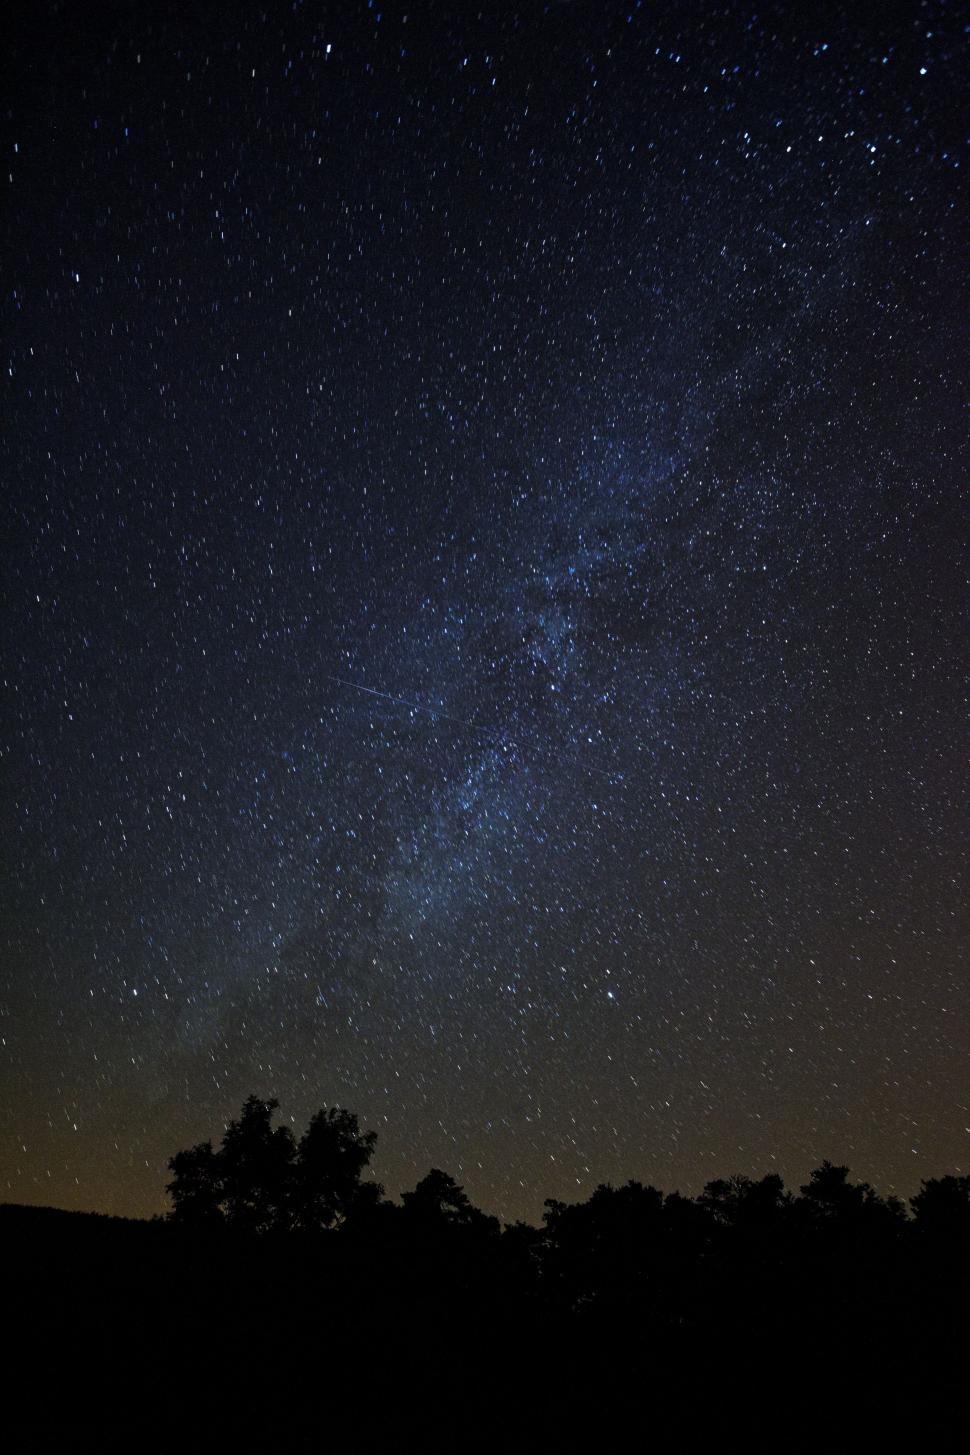 Free Image of The Night Sky Filled With Countless Stars 